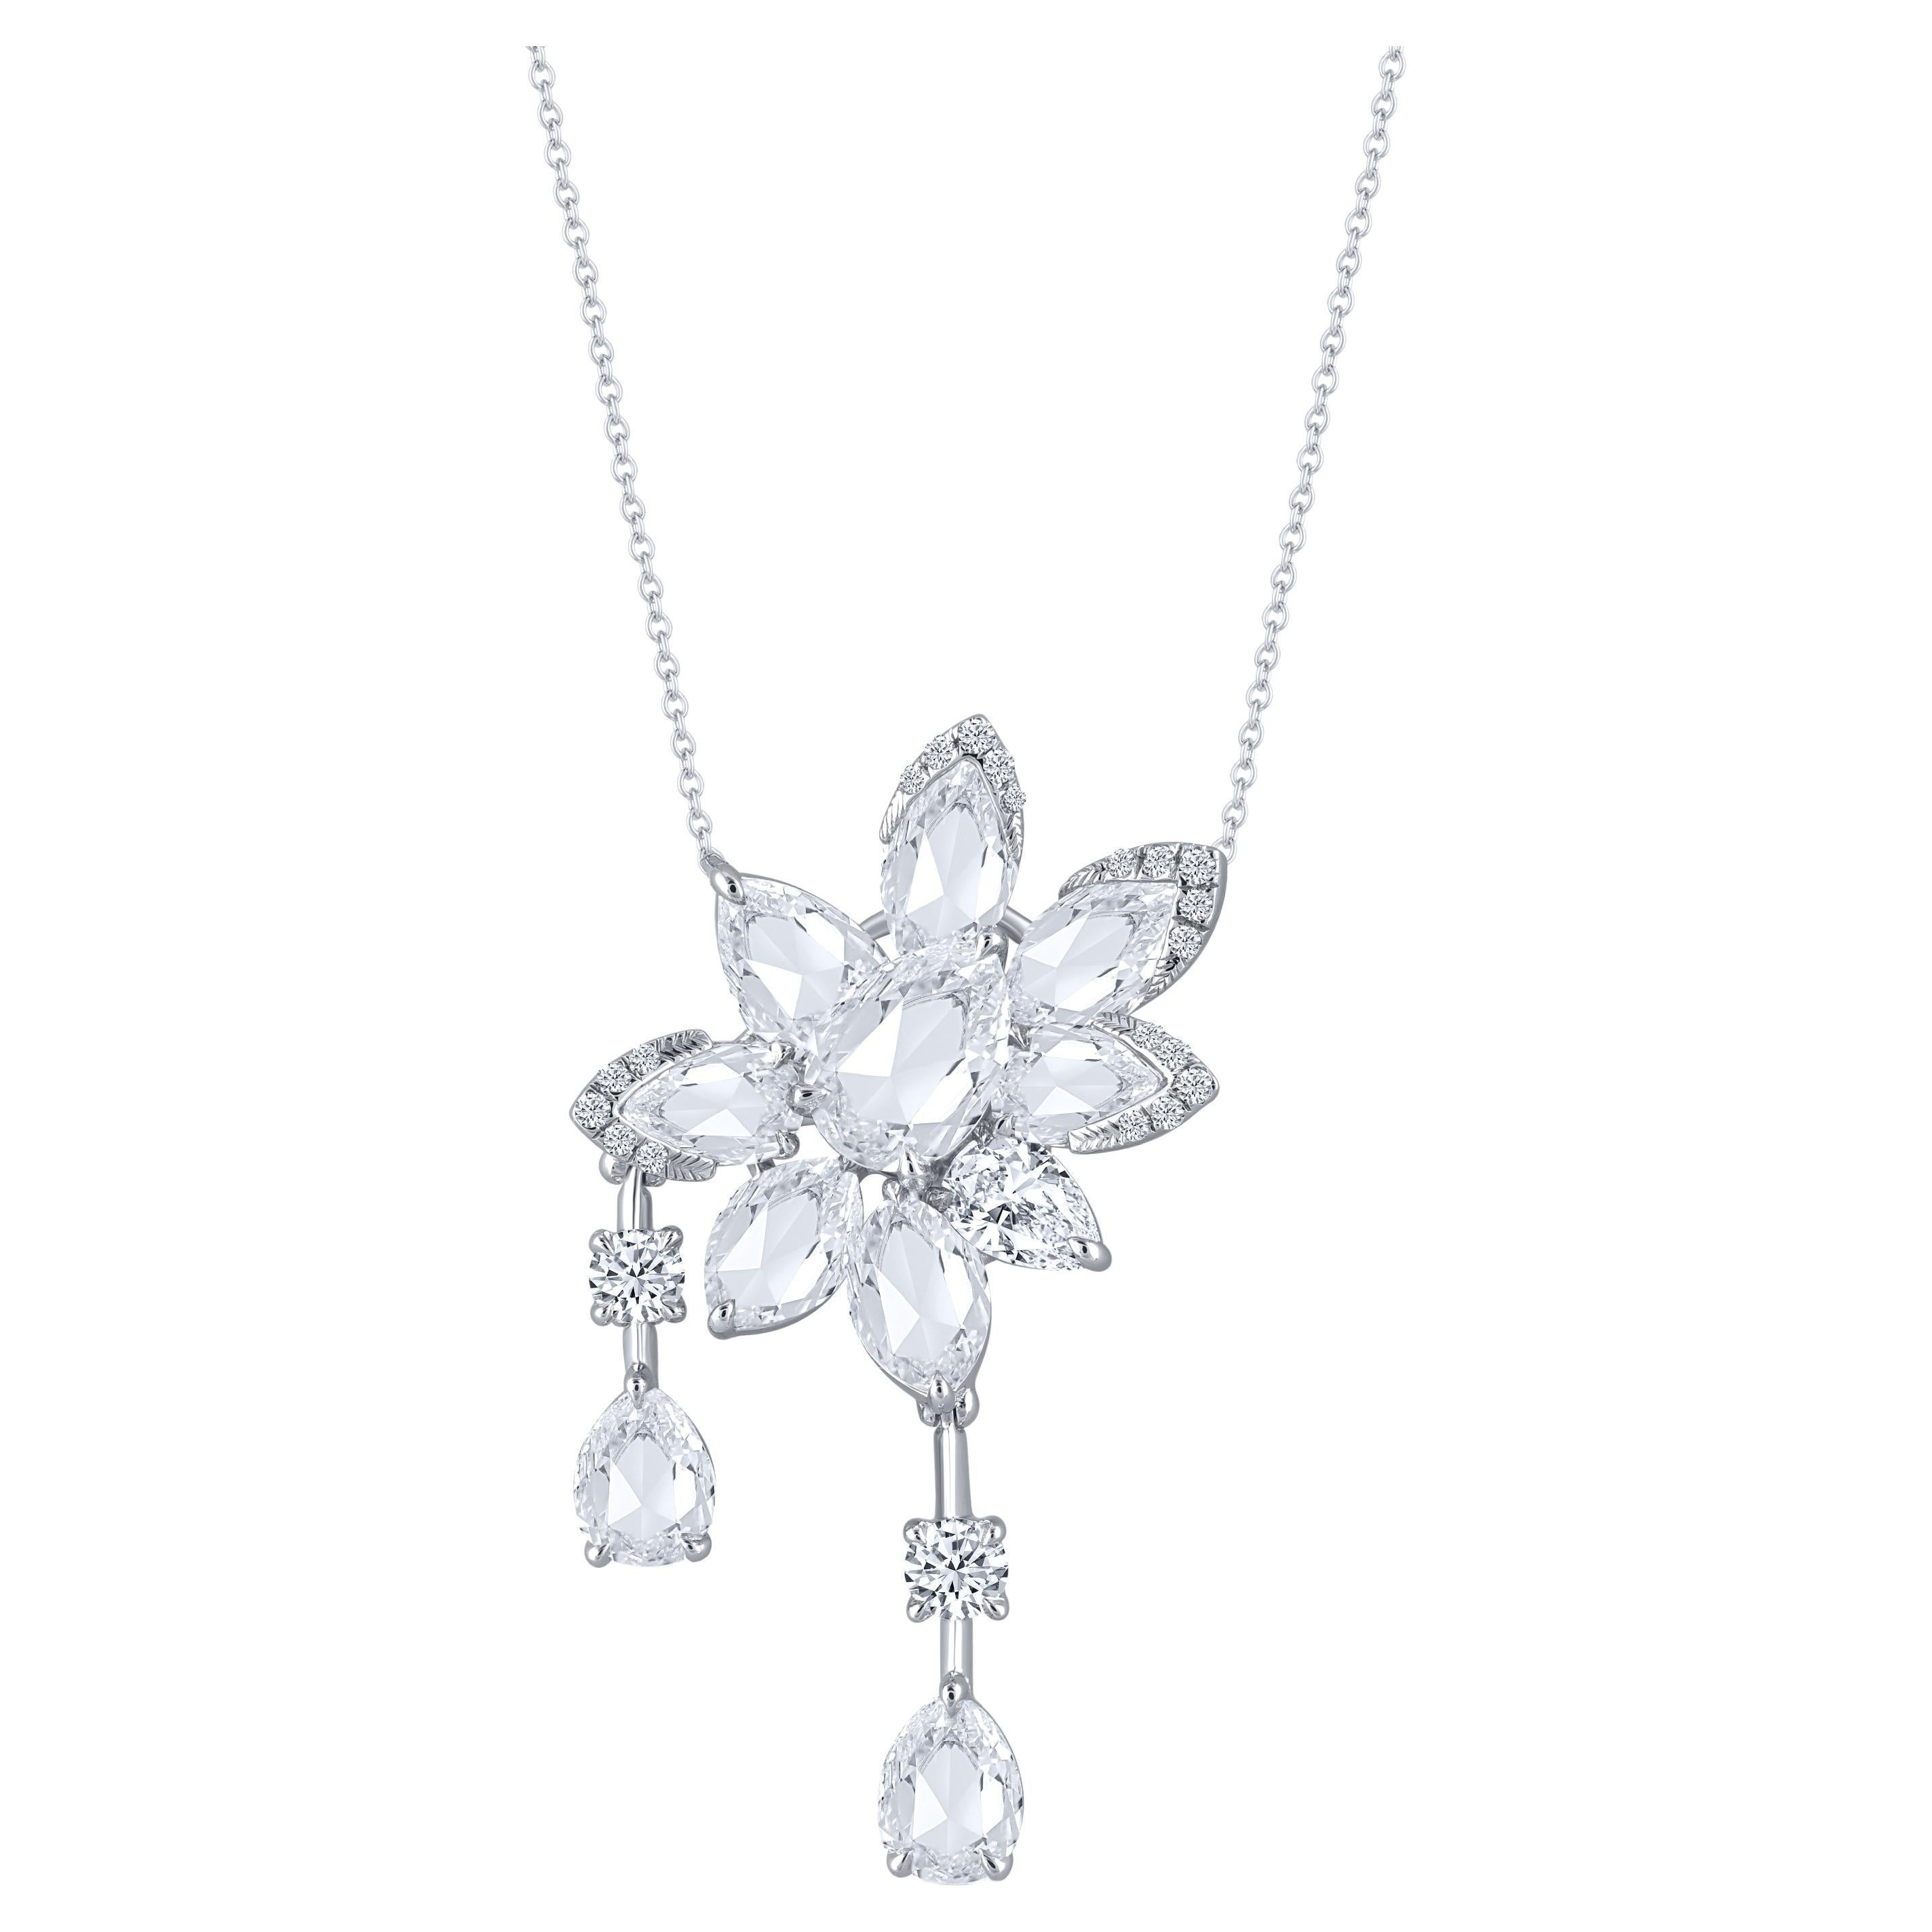 Harakh Colorless Diamond 1.80 Carat Pendant Necklace in 18 Kt White Gold